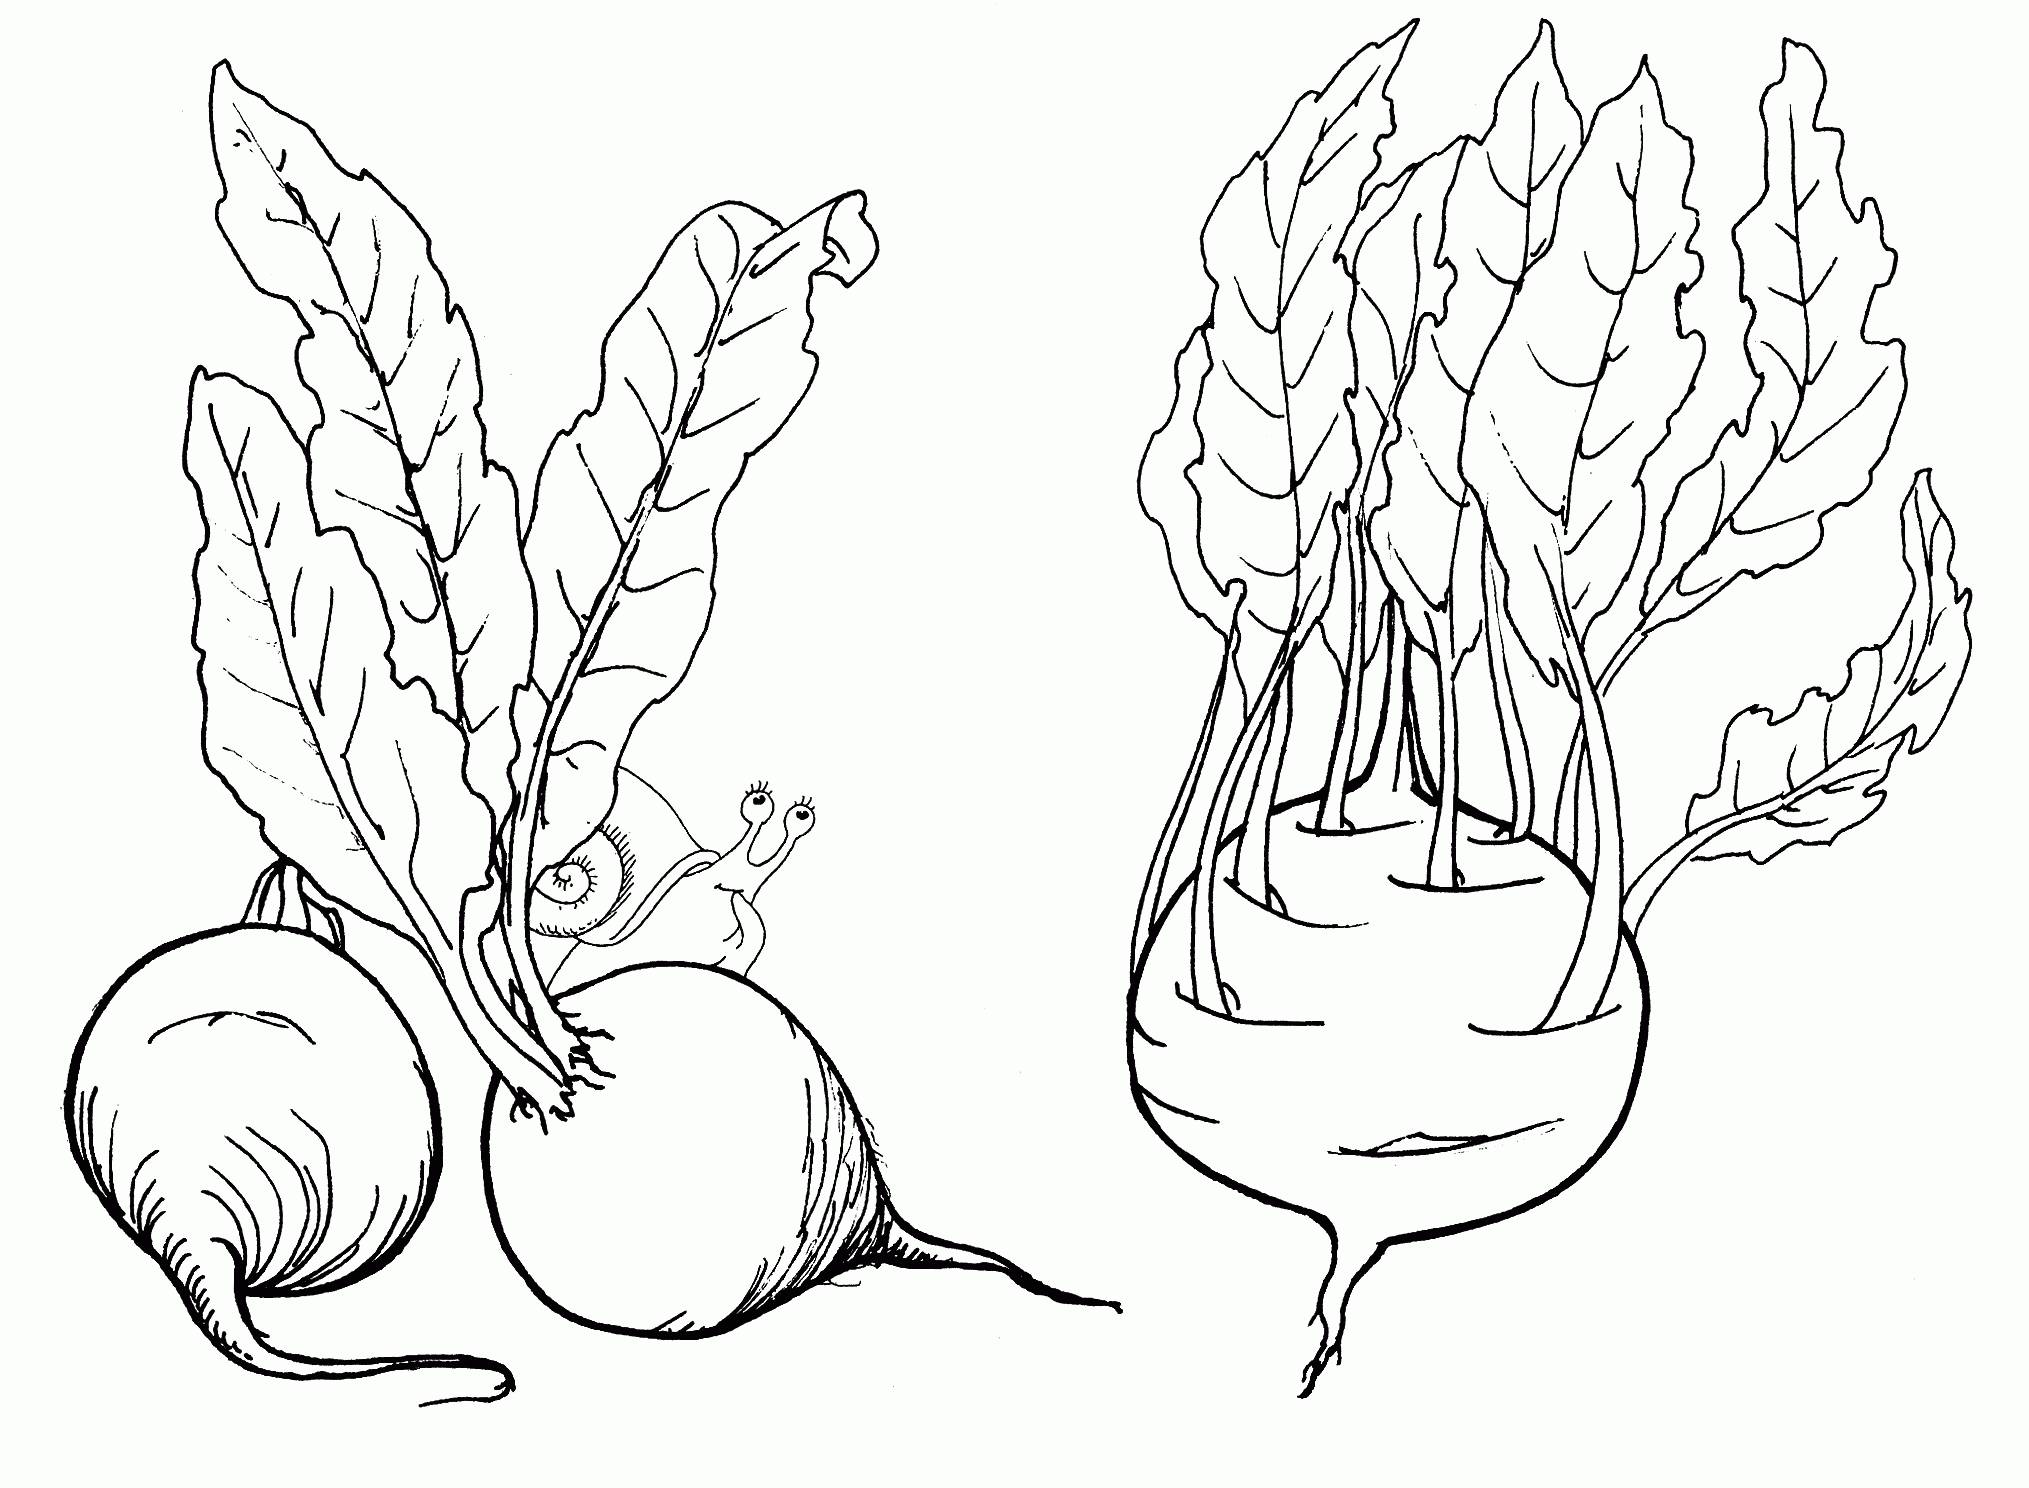 Beet and snail